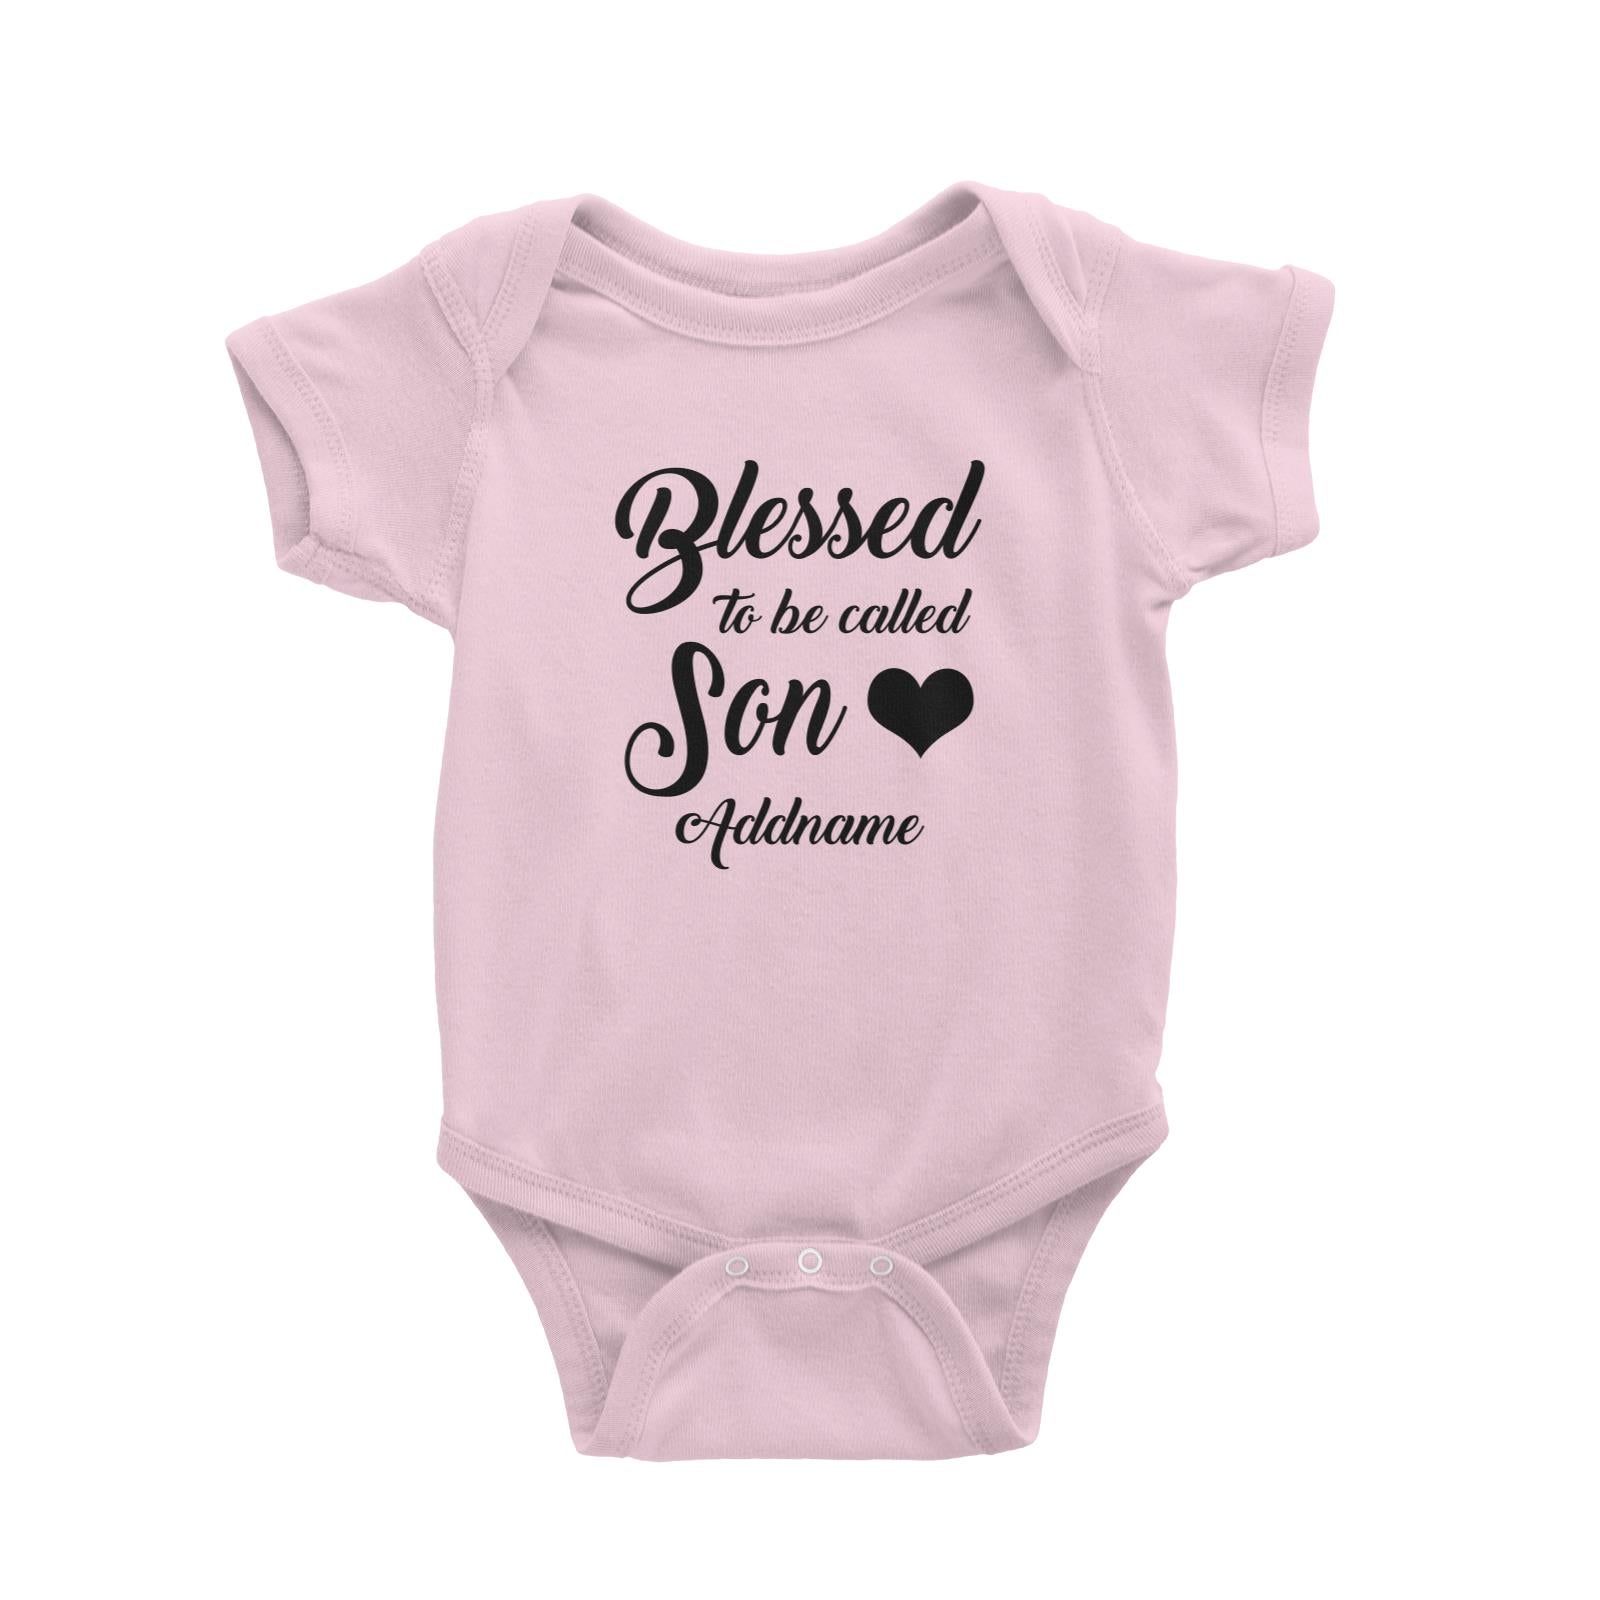 Blessed To Be Called Son Baby Romper